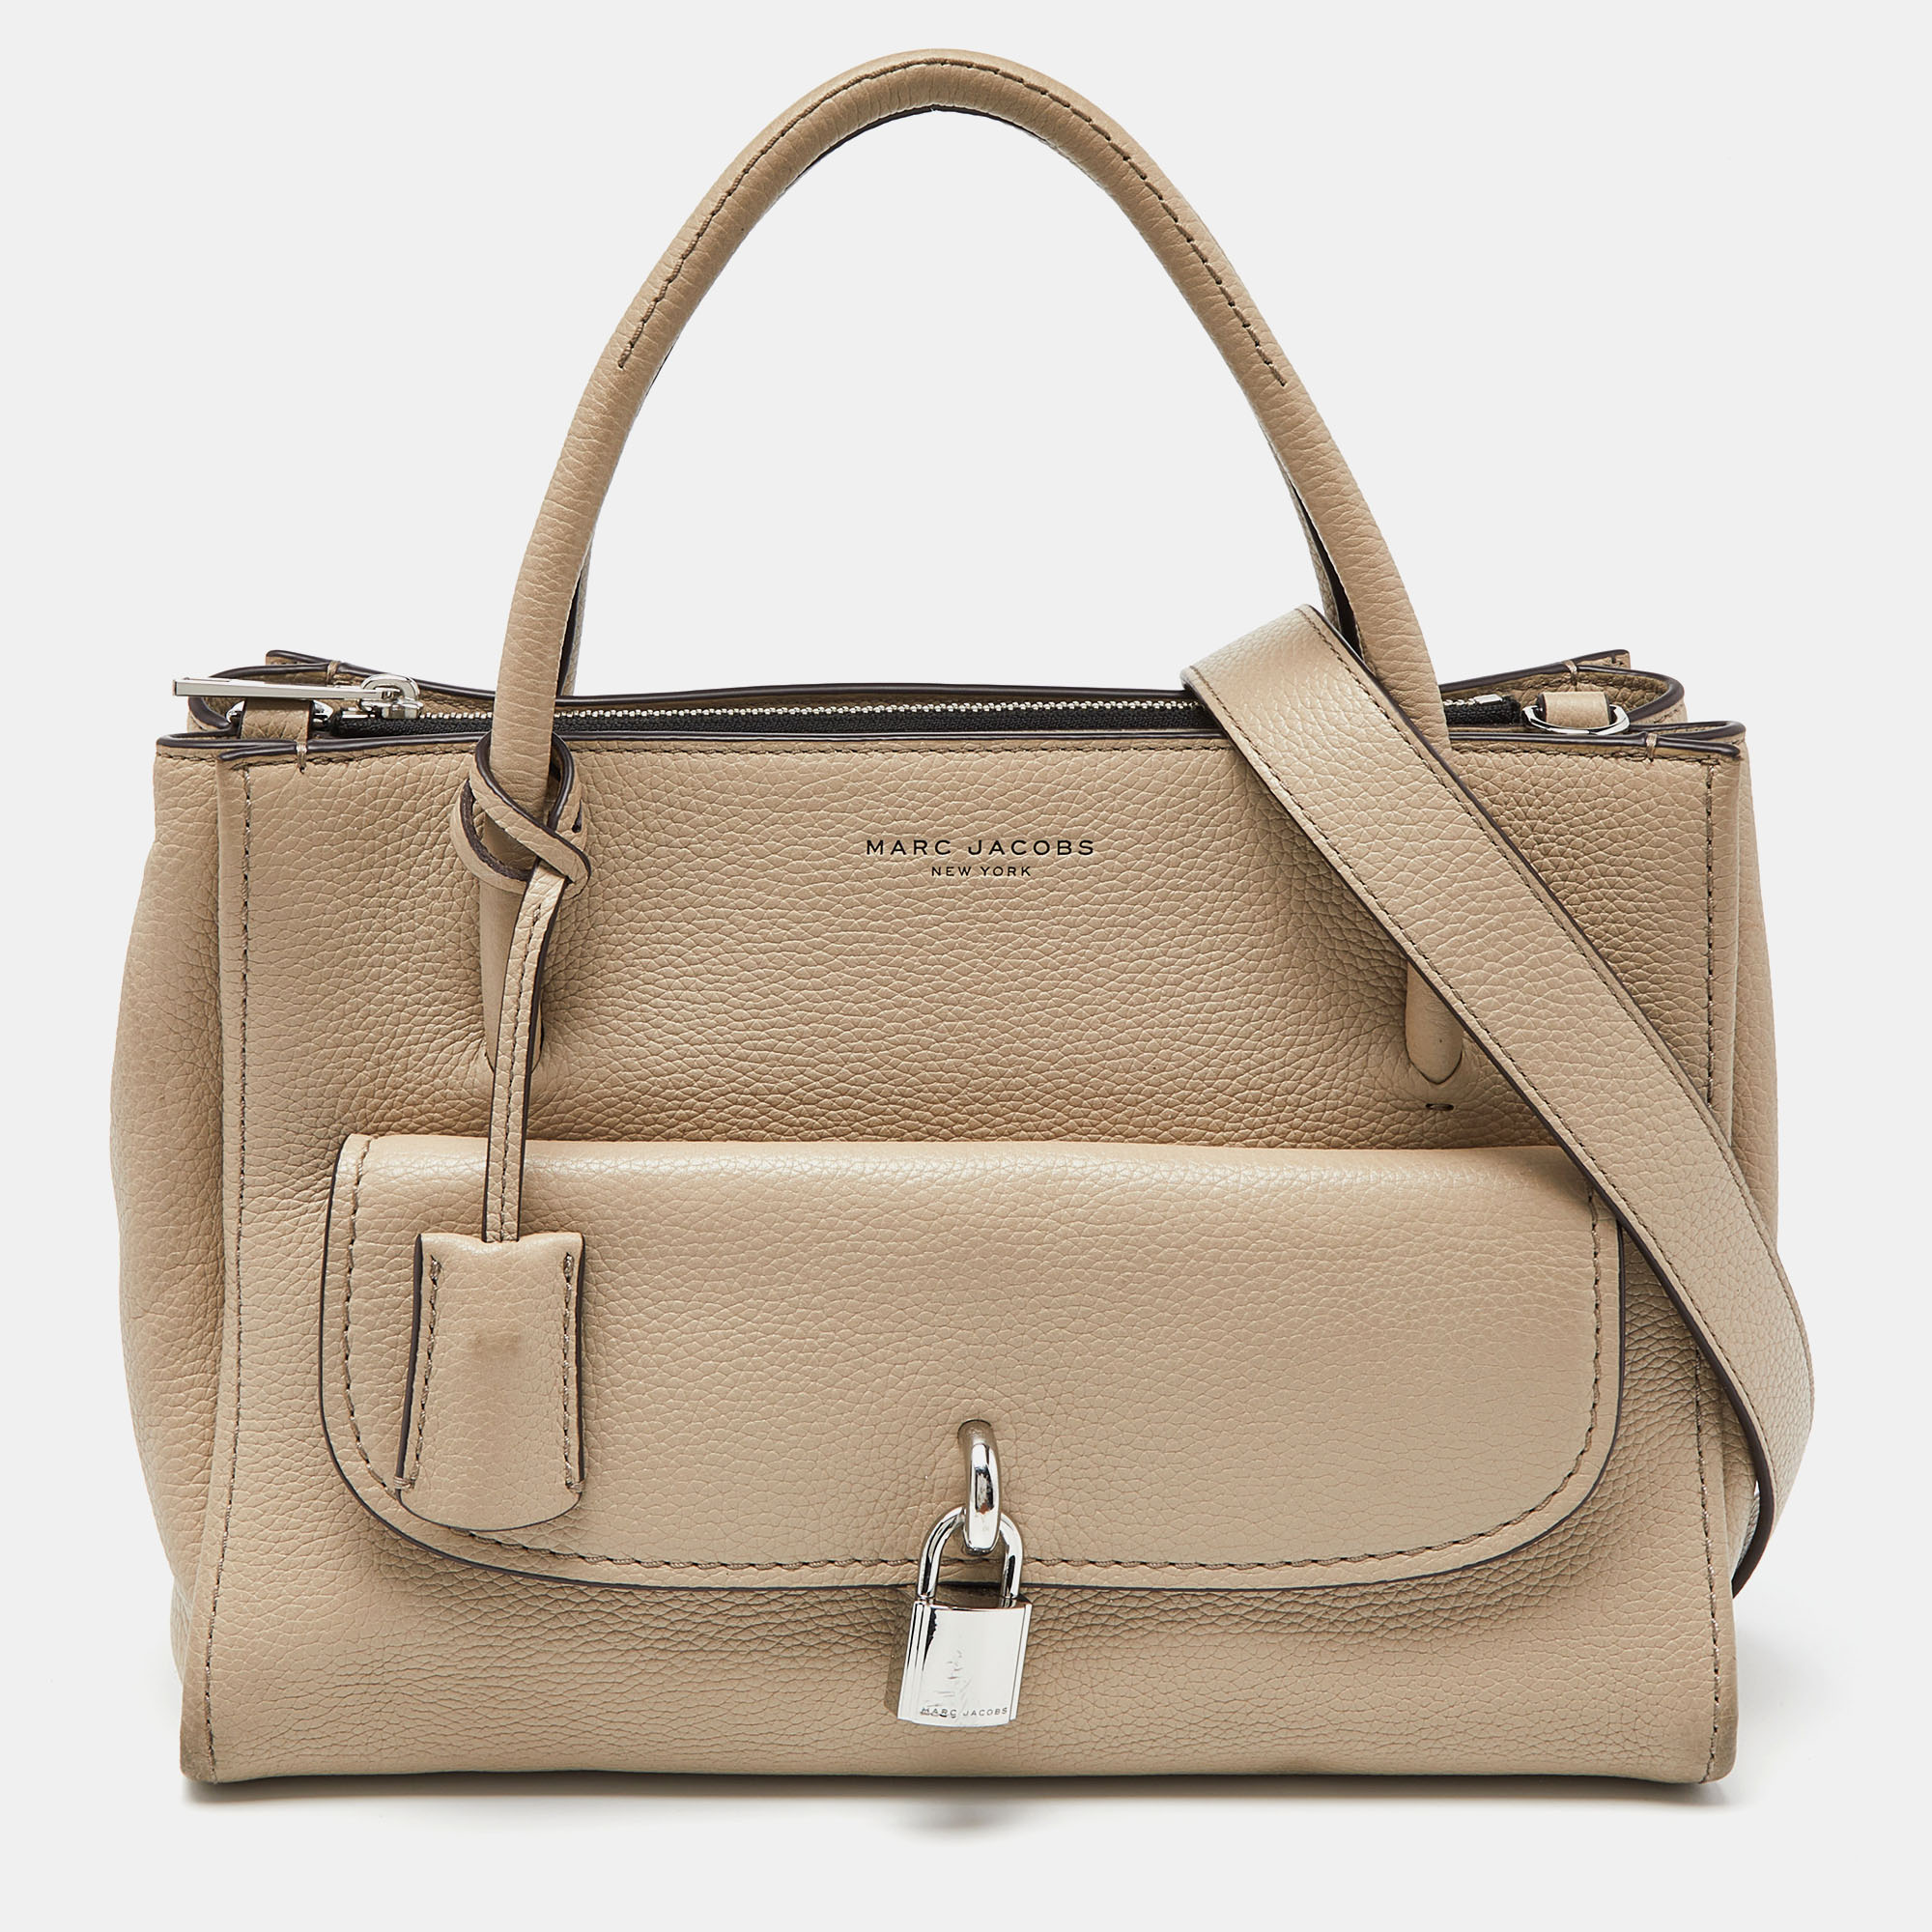 Marc Jacobs Beige Leather Lock That Tote